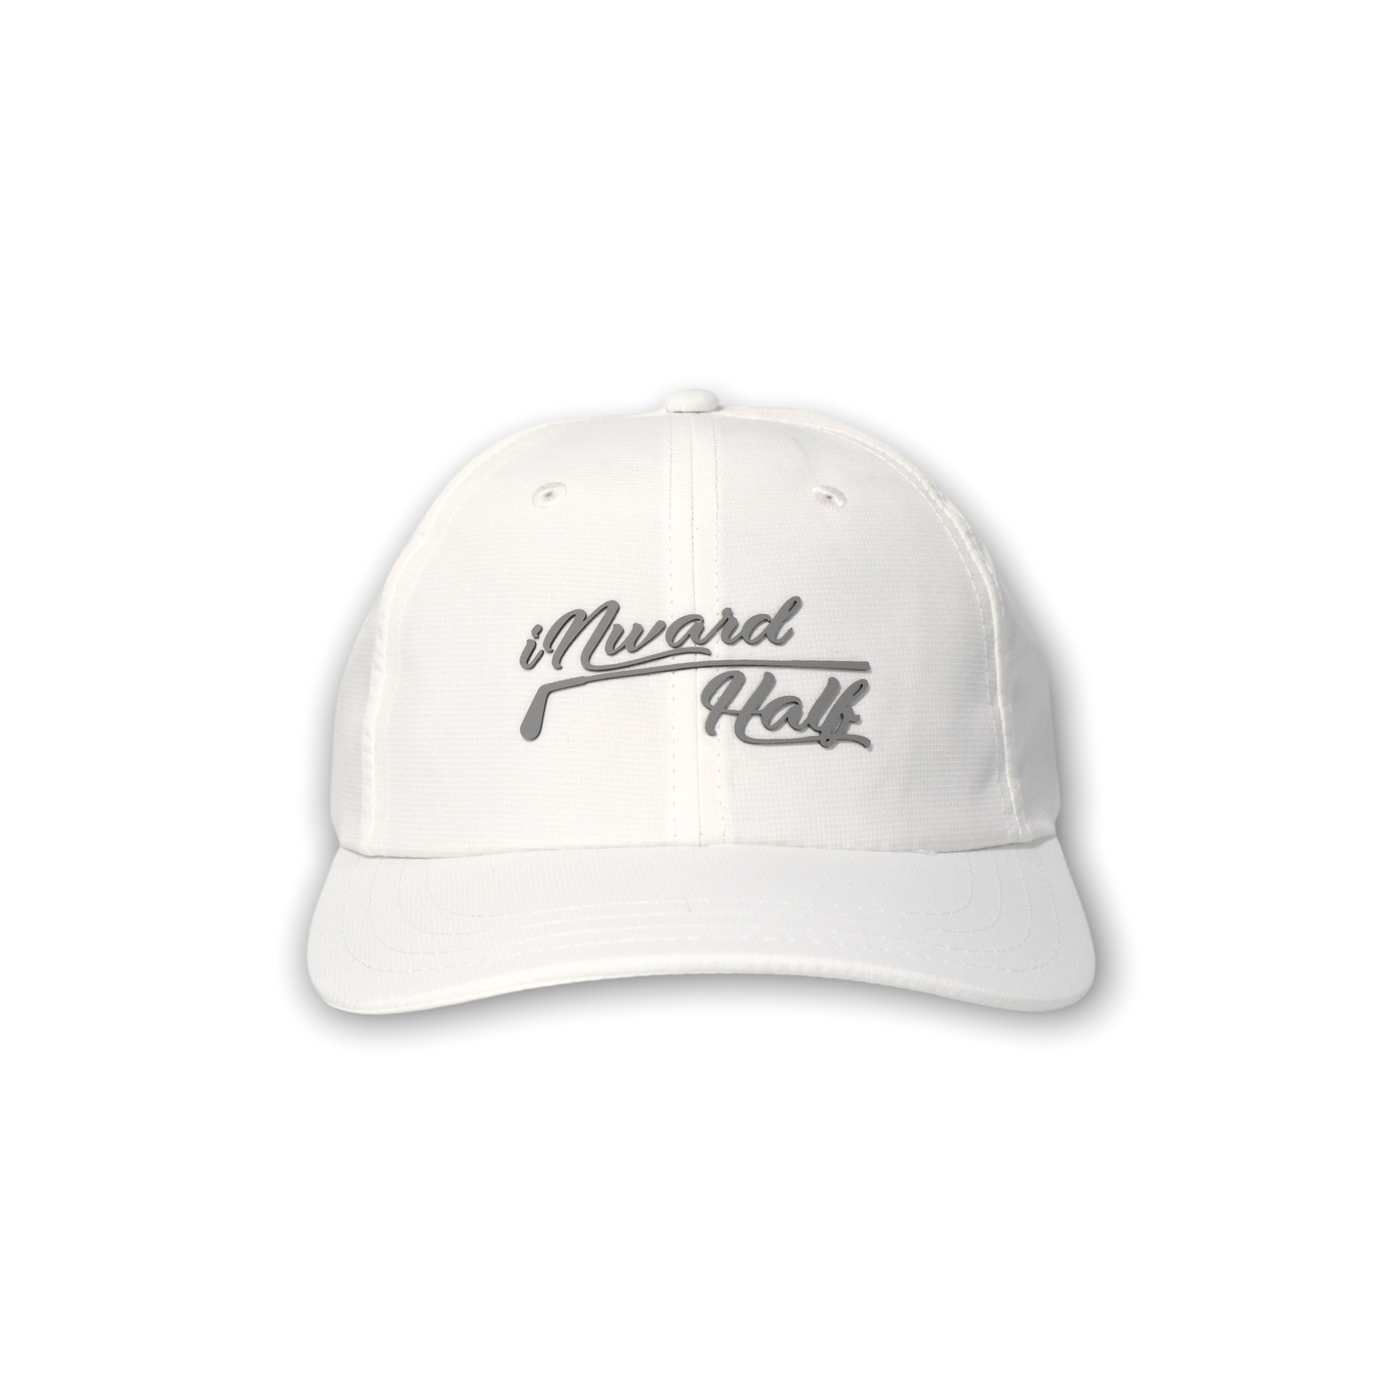 Tour Performance Hat (Small Fit)